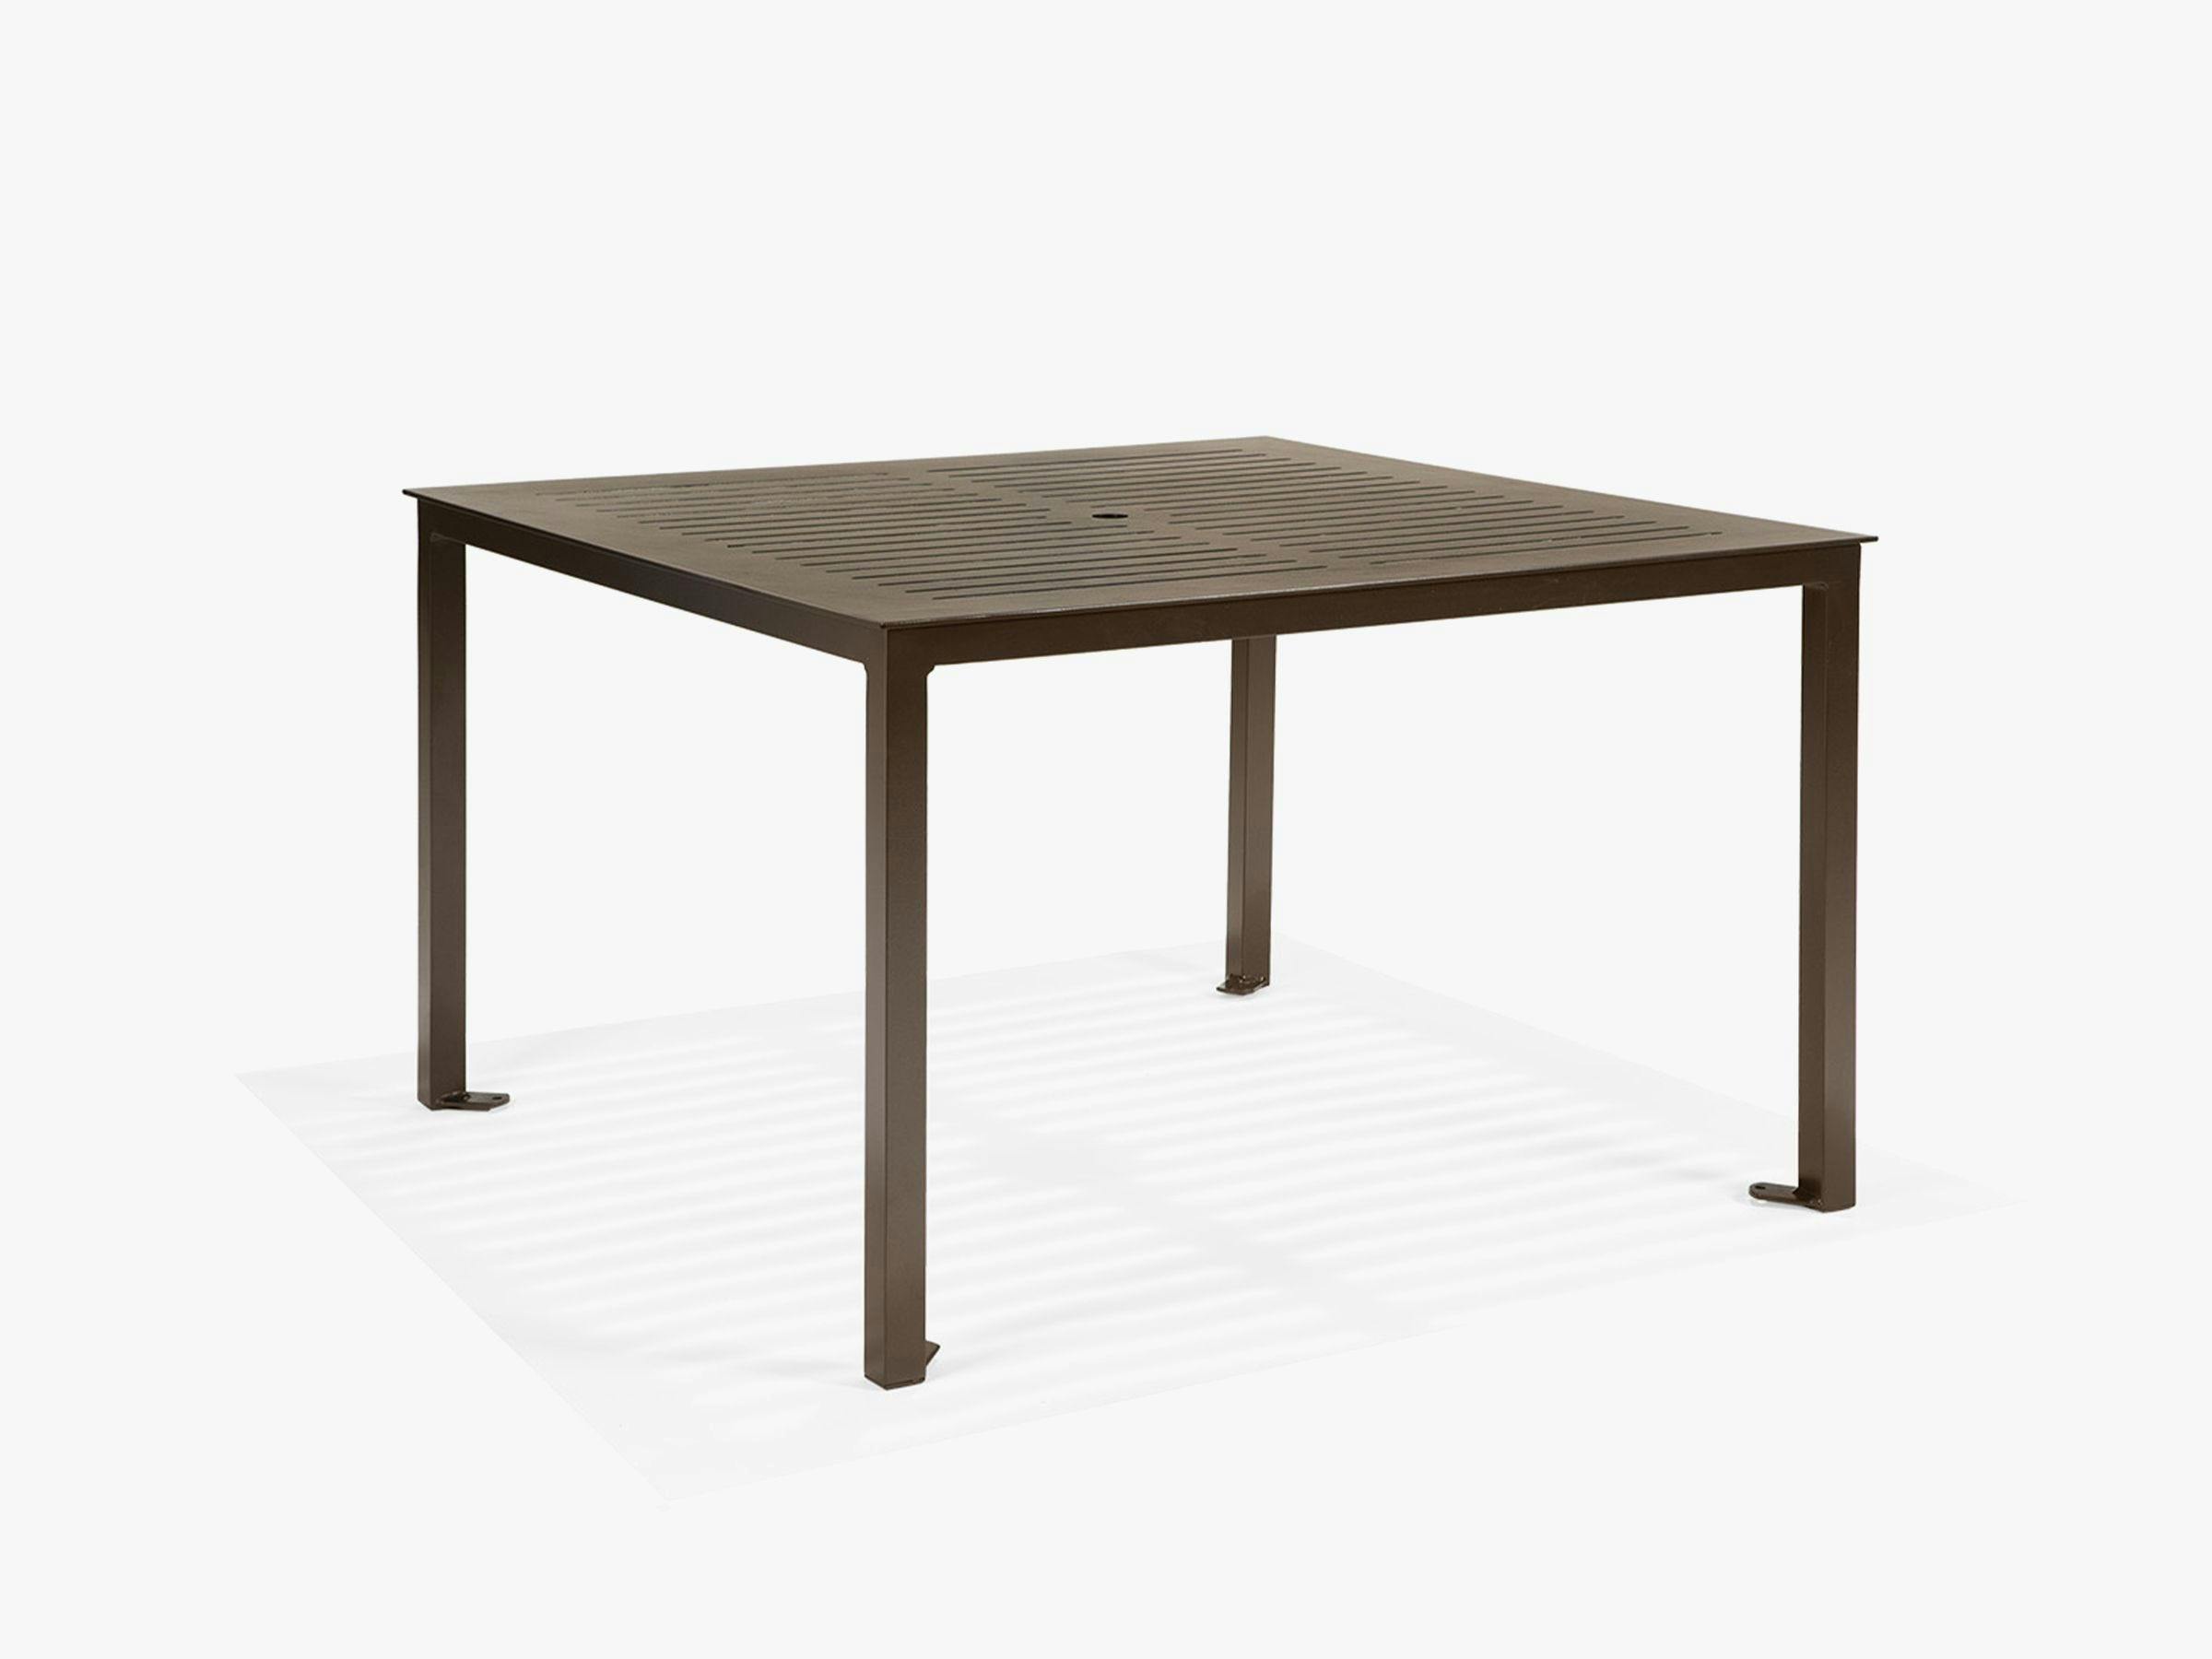 Portico 48" Square Dining Table